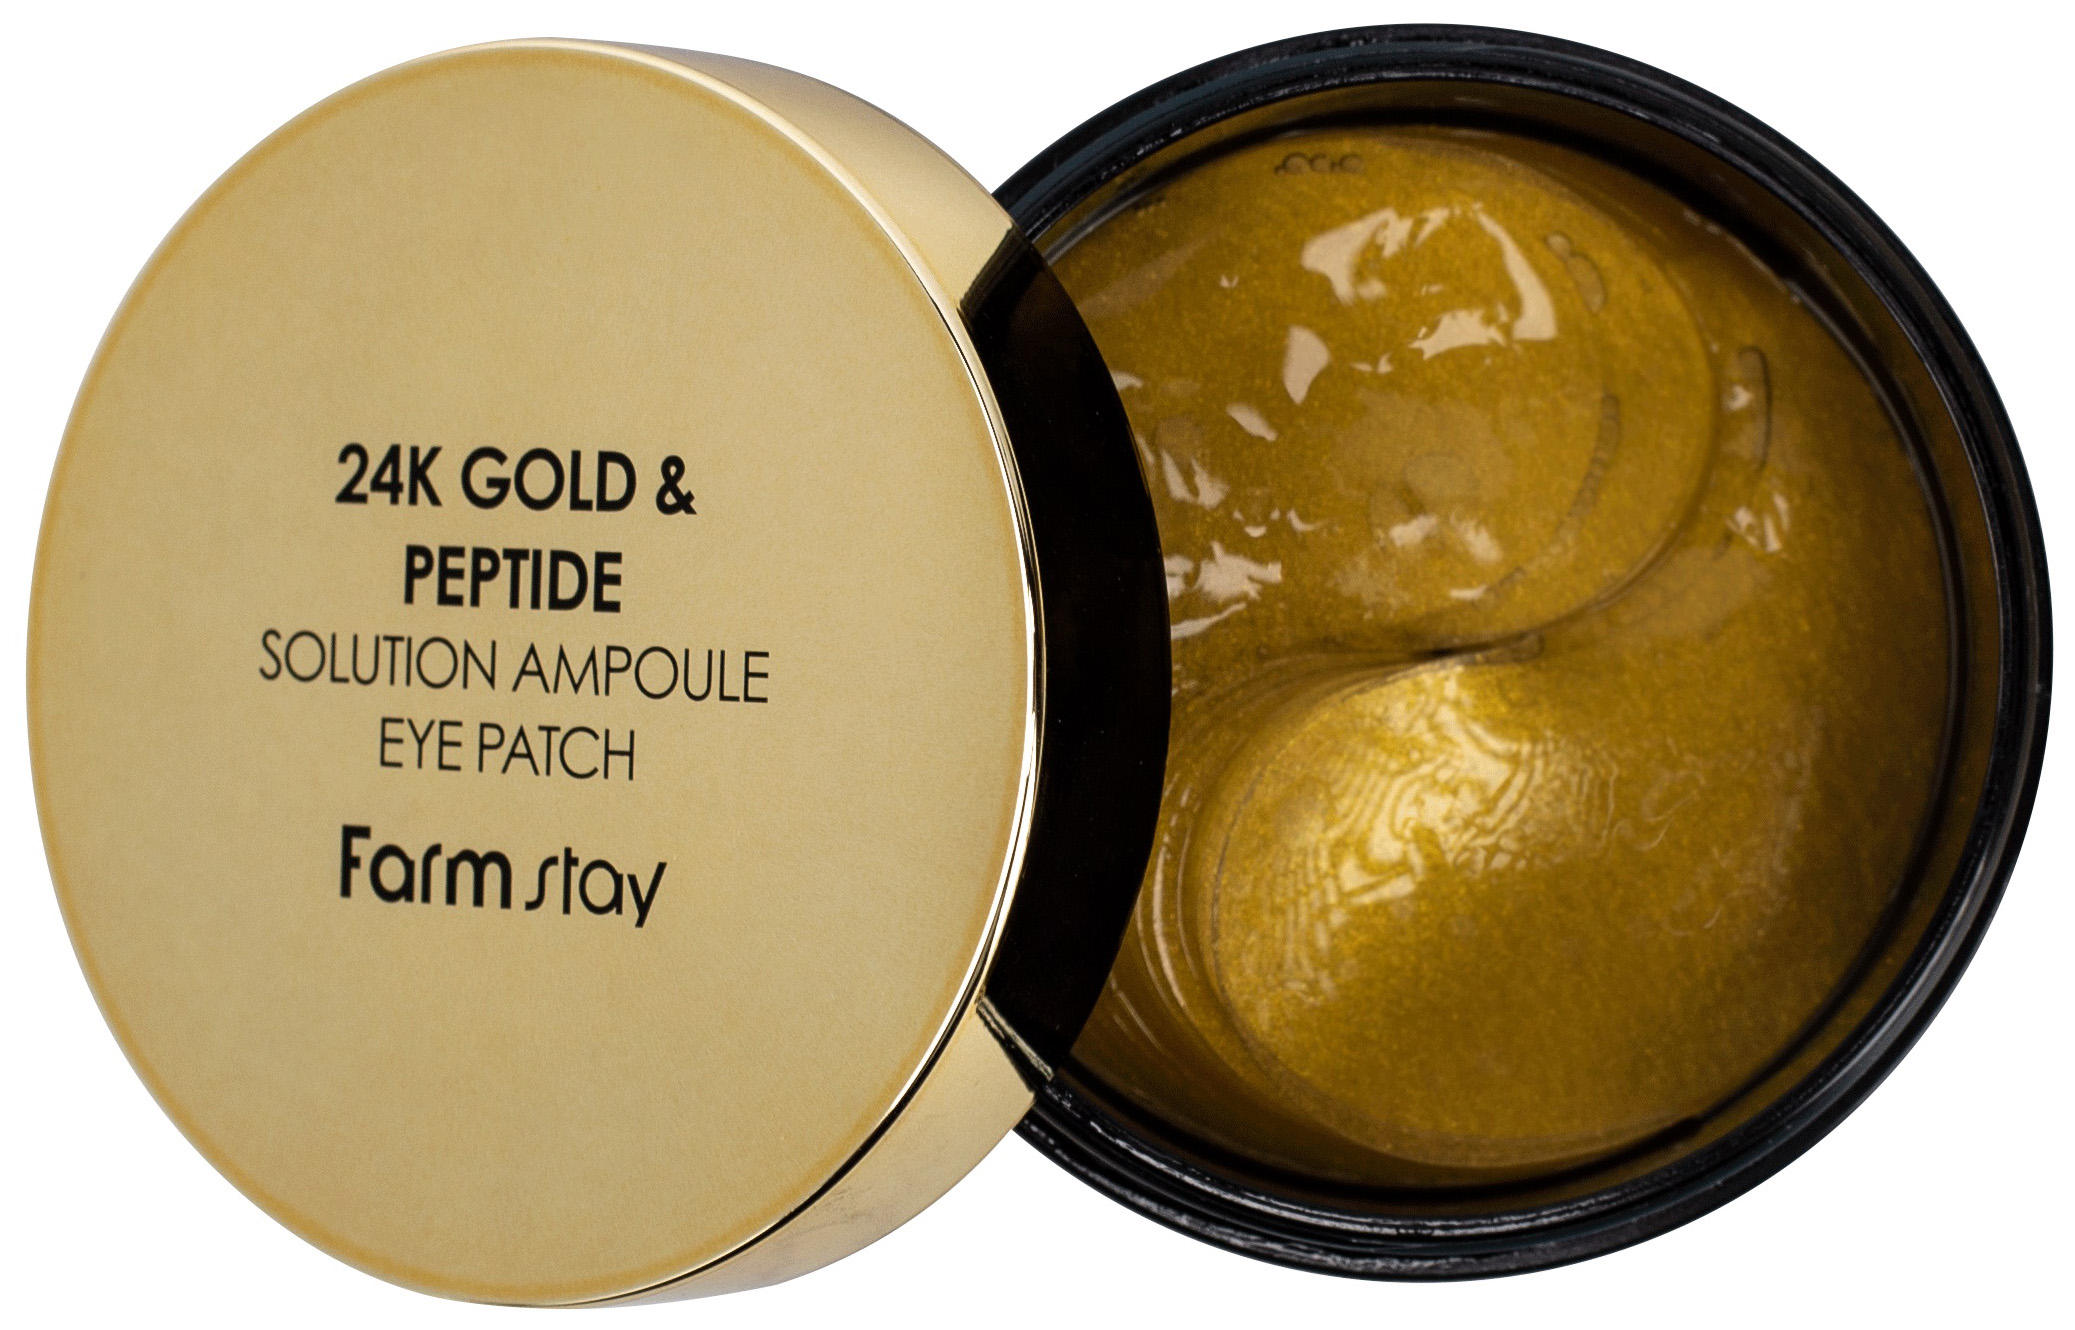 Патчи для глаз Farm Stay 24K Gold & Peptide Solution Ampoule Eye Patch 90 г патчи для глаз farm stay 24k gold